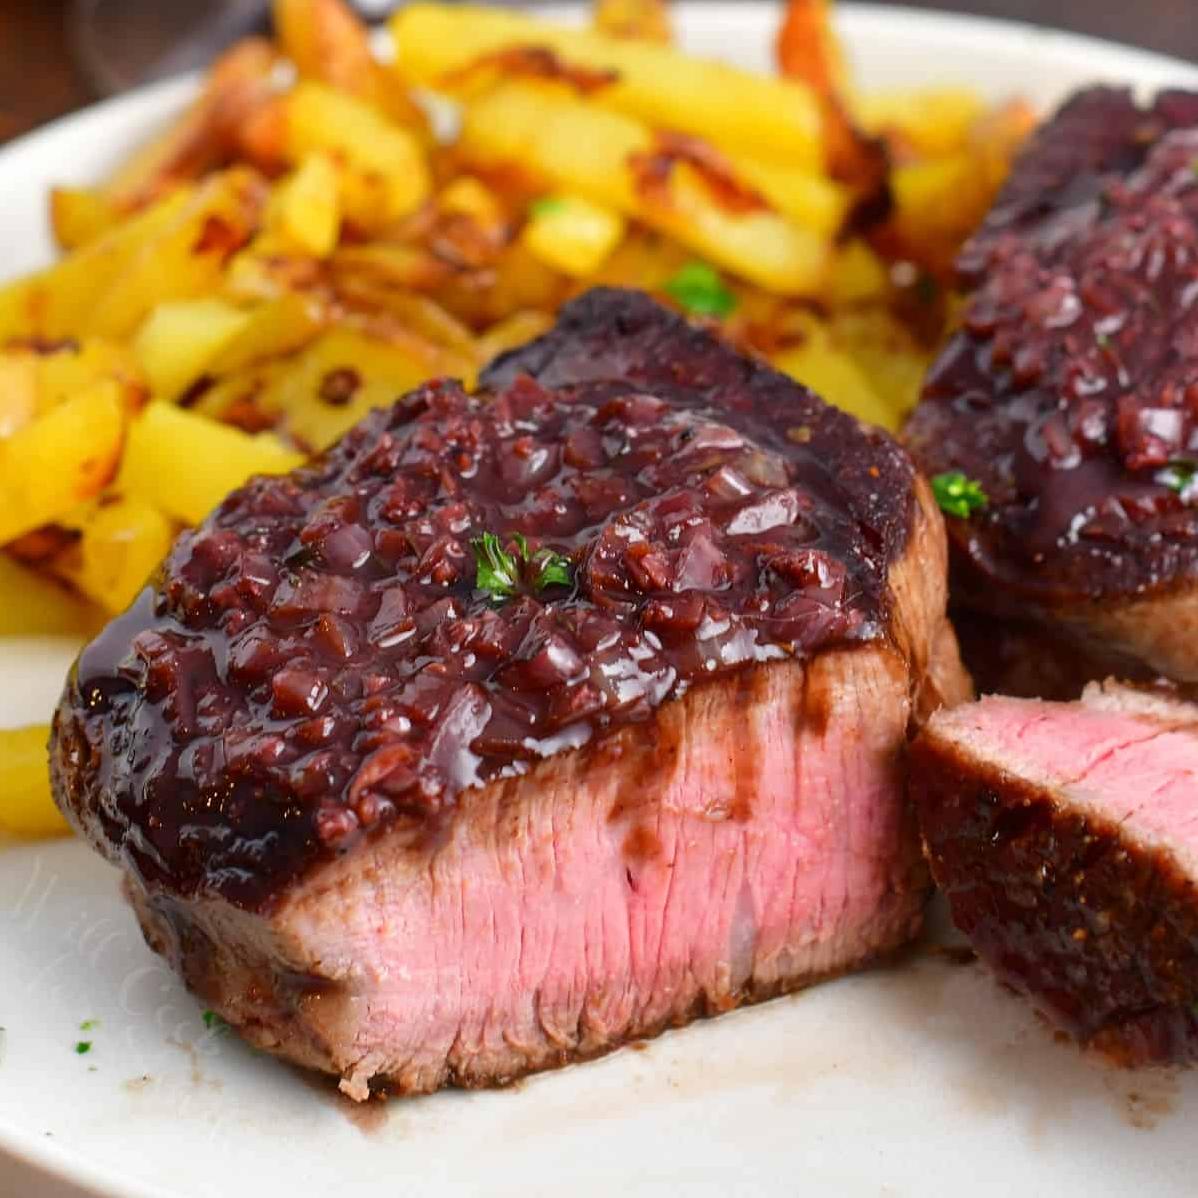  Impress your dinner guests with a delicious steak dinner covered in Merlot sauce.